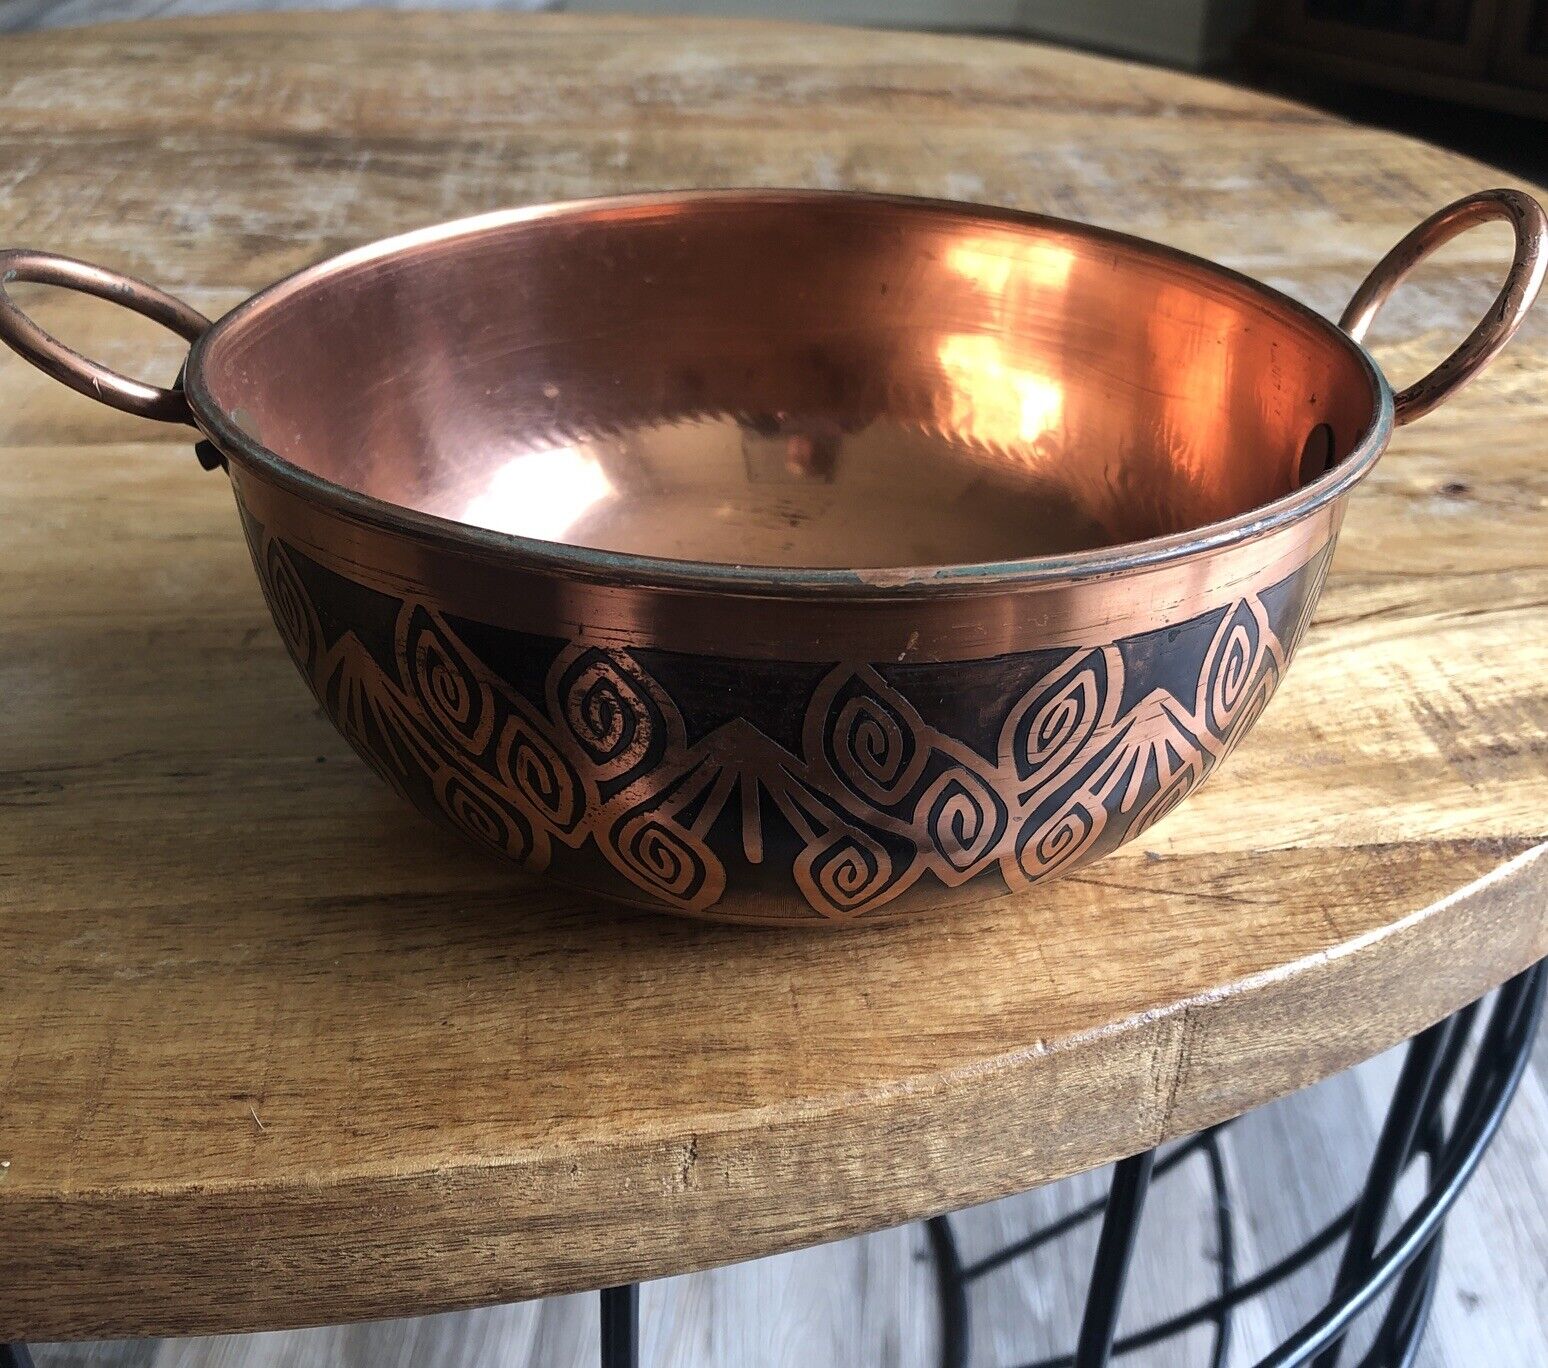 Etched Copper Bowl With Handles 6.75X3” Decorative Design Black&Copper Colombia